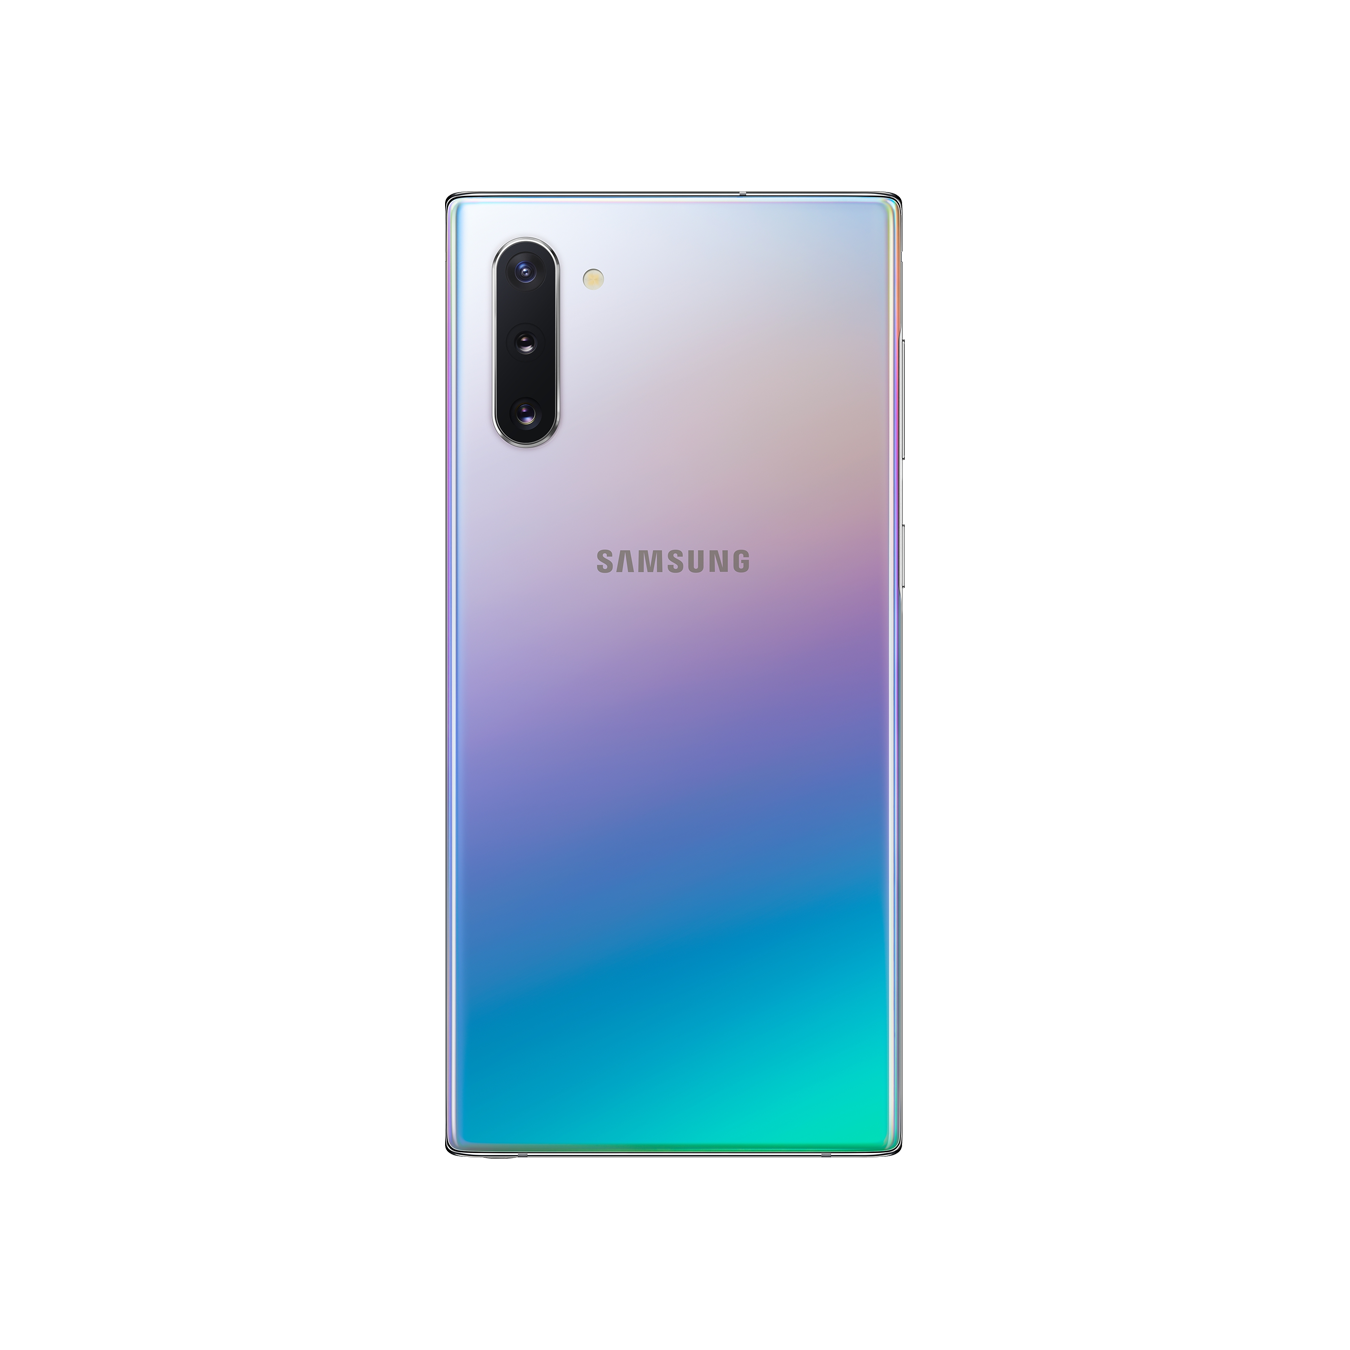 Samsung Galaxy Note10 network unlock, remove SIM restrictions for global use, available at cleanimei.com